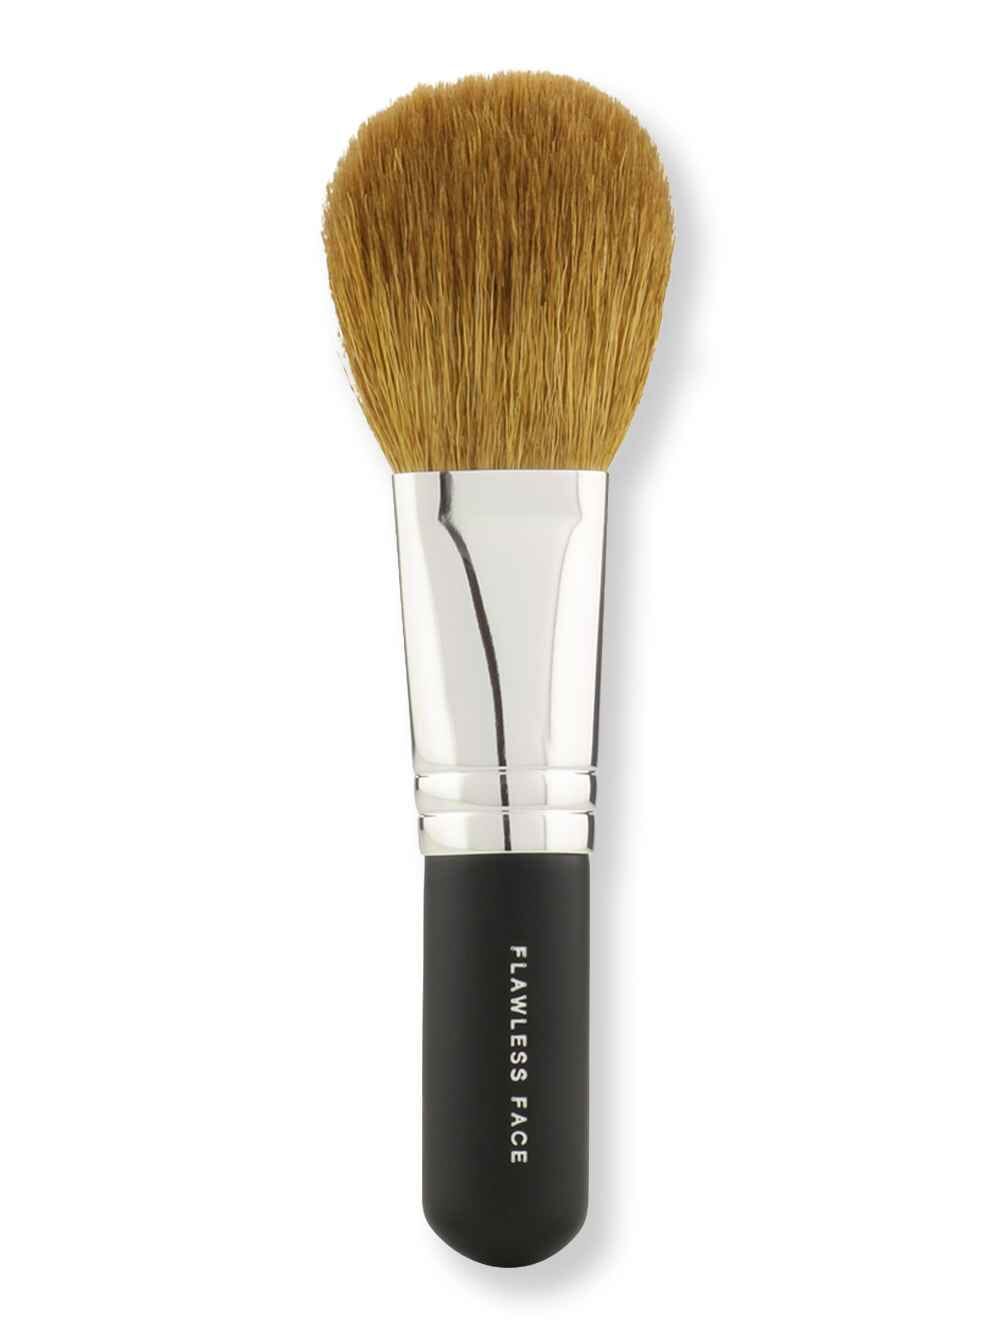 Bareminerals Bareminerals Flawless Application Face Brush Makeup Brushes 